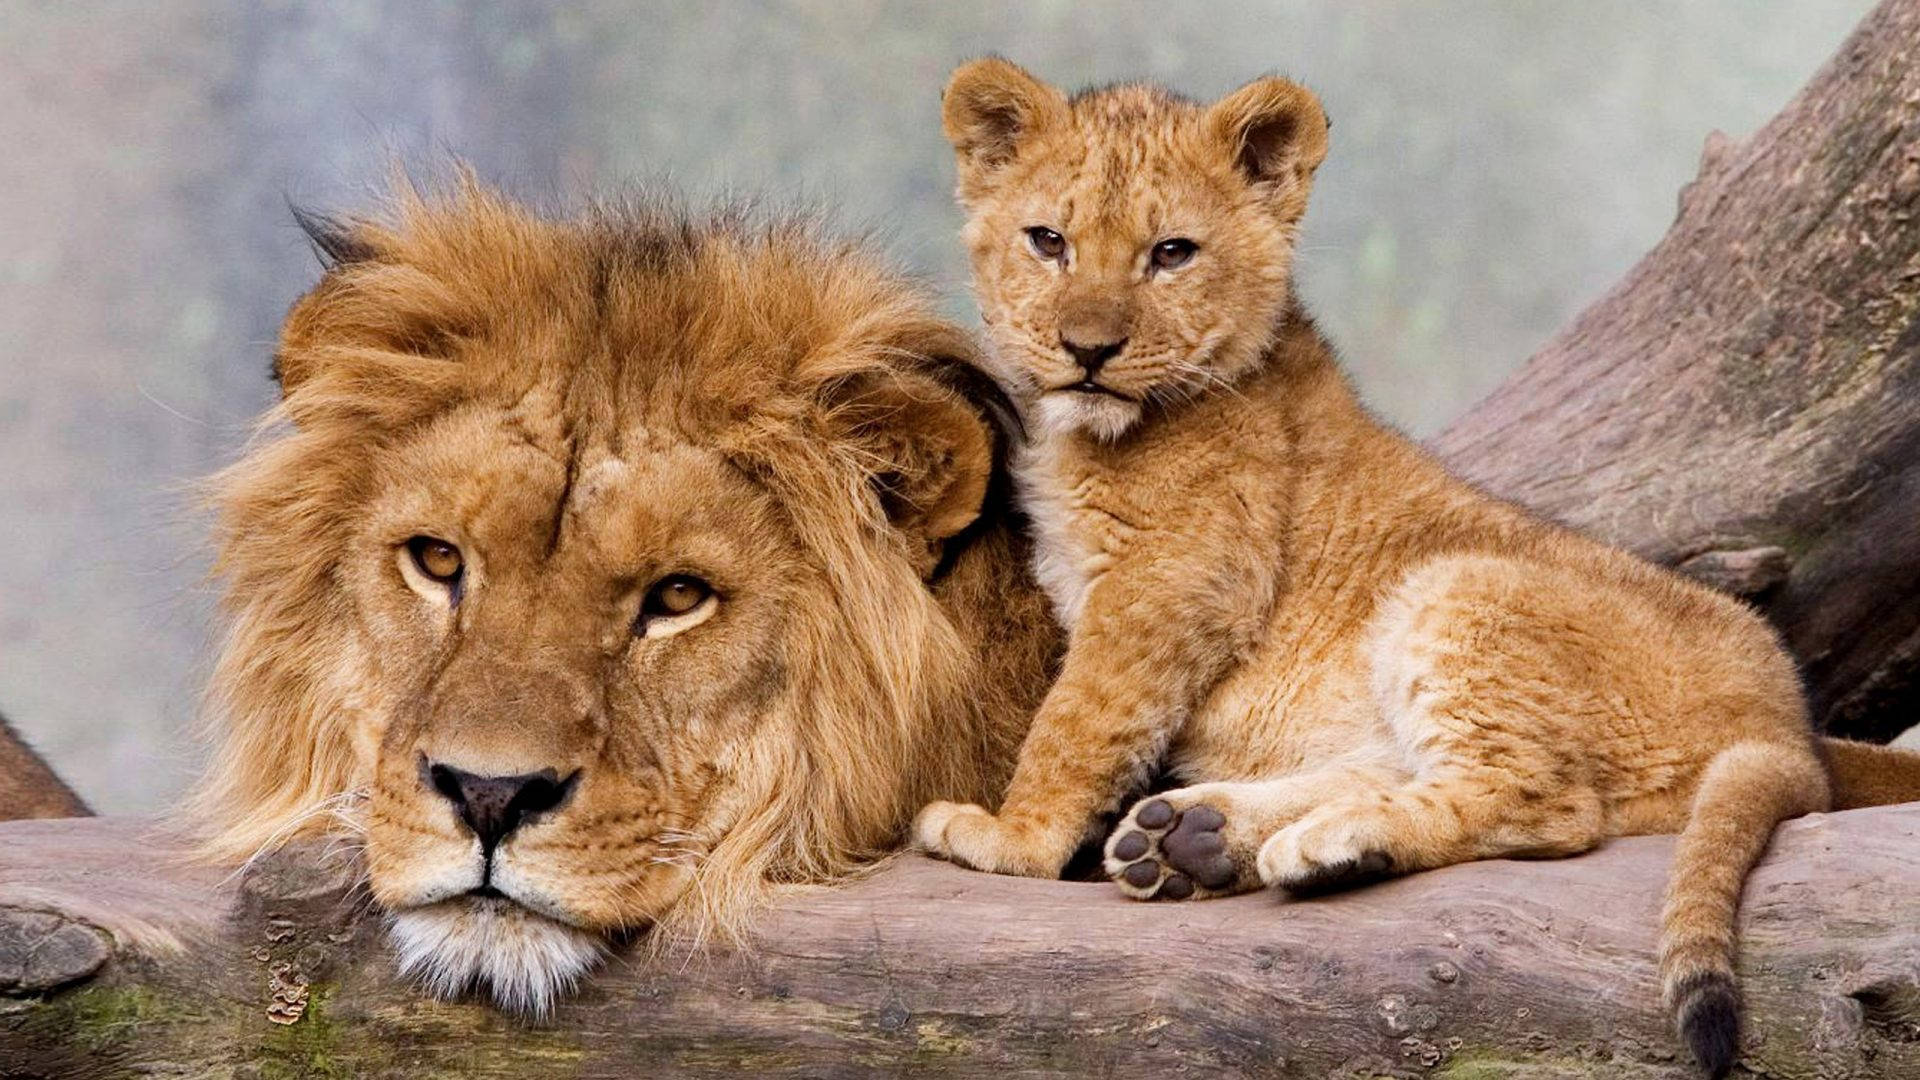 Cub Resting With Male Lion Background